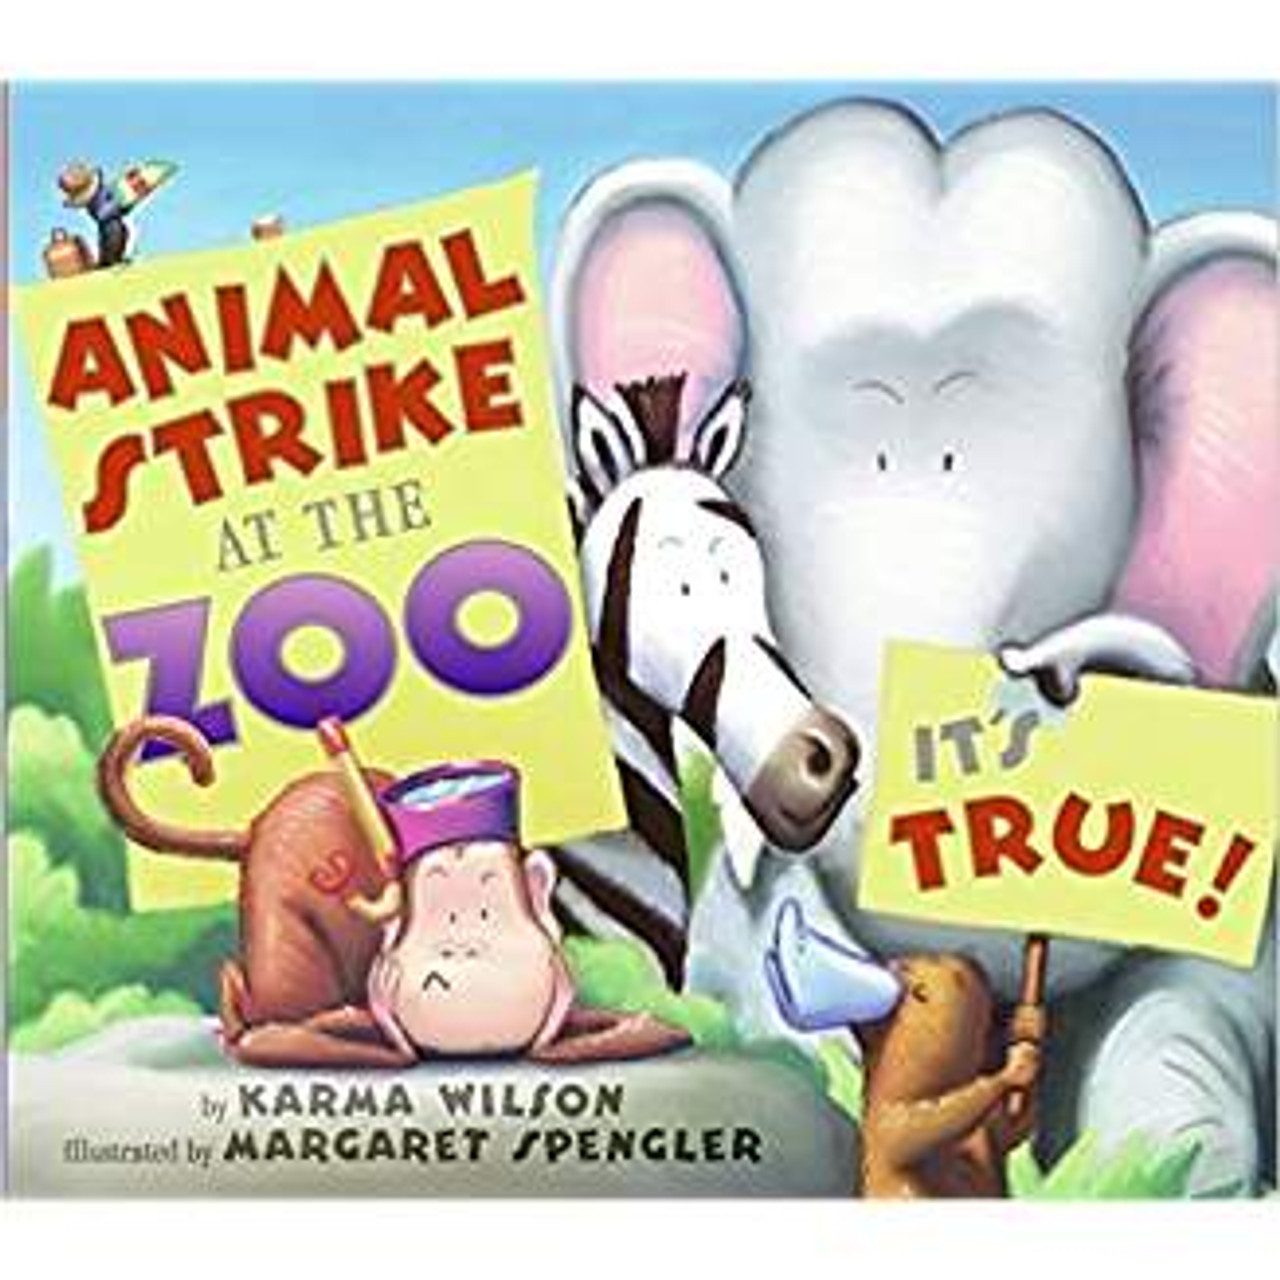 Bestselling author Wilson has created a zoo where it's anything "but" business as usual, while Spengler's lively pastels depict an unforgettable cast of characters. Full color.